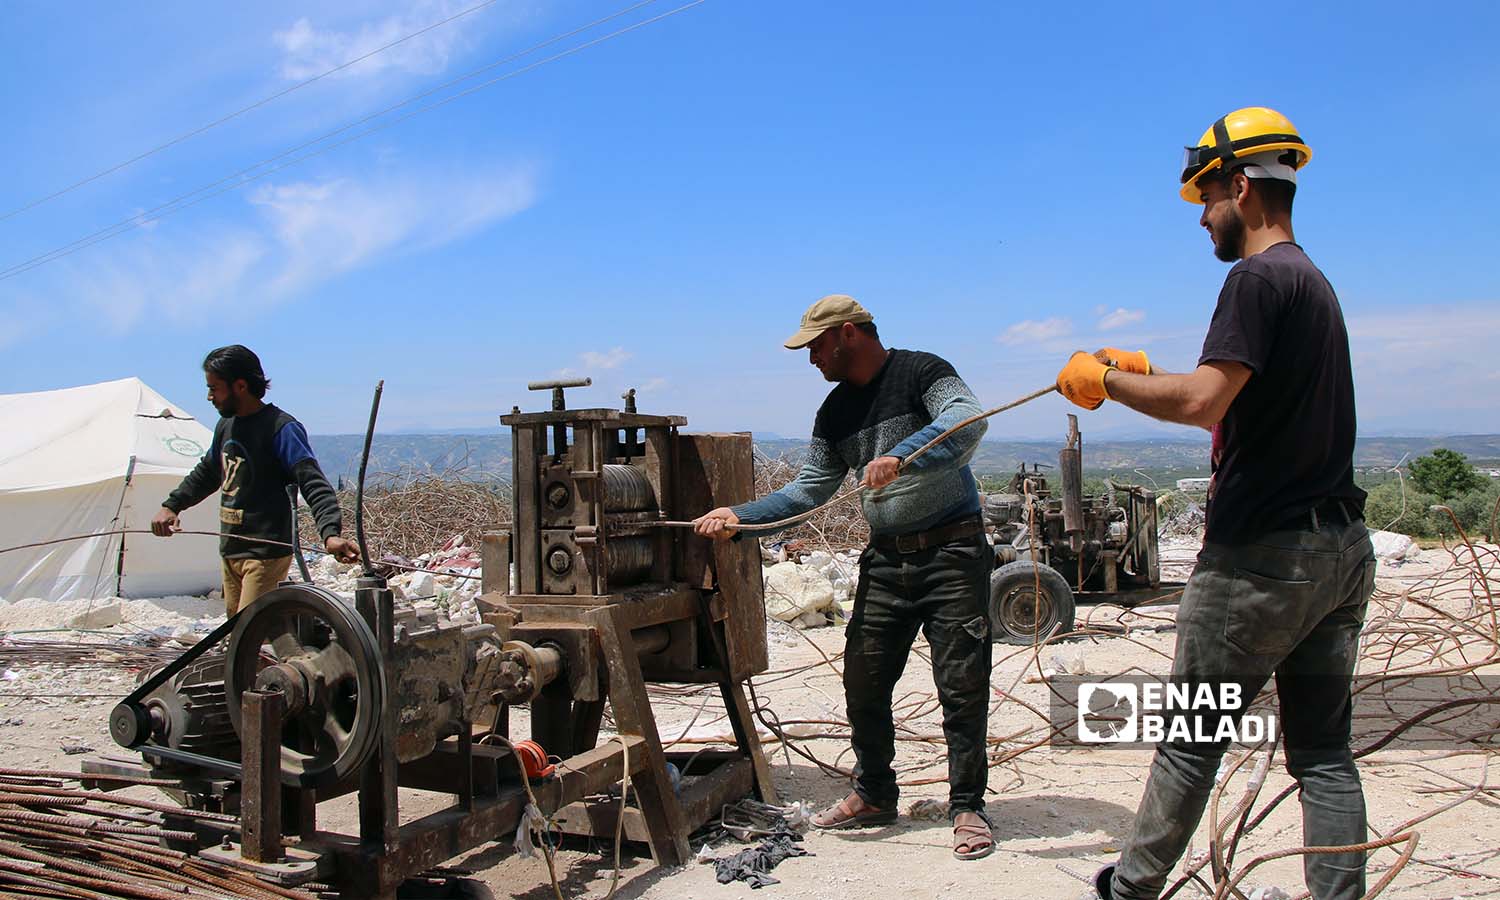 Construction workers straighten iron bars collected from quake-destroyed buildings to recycle them in Salqin city in Idlib countryside - April 30, 2023 (Enab Baladi/Iyad Abdul Jawad)
